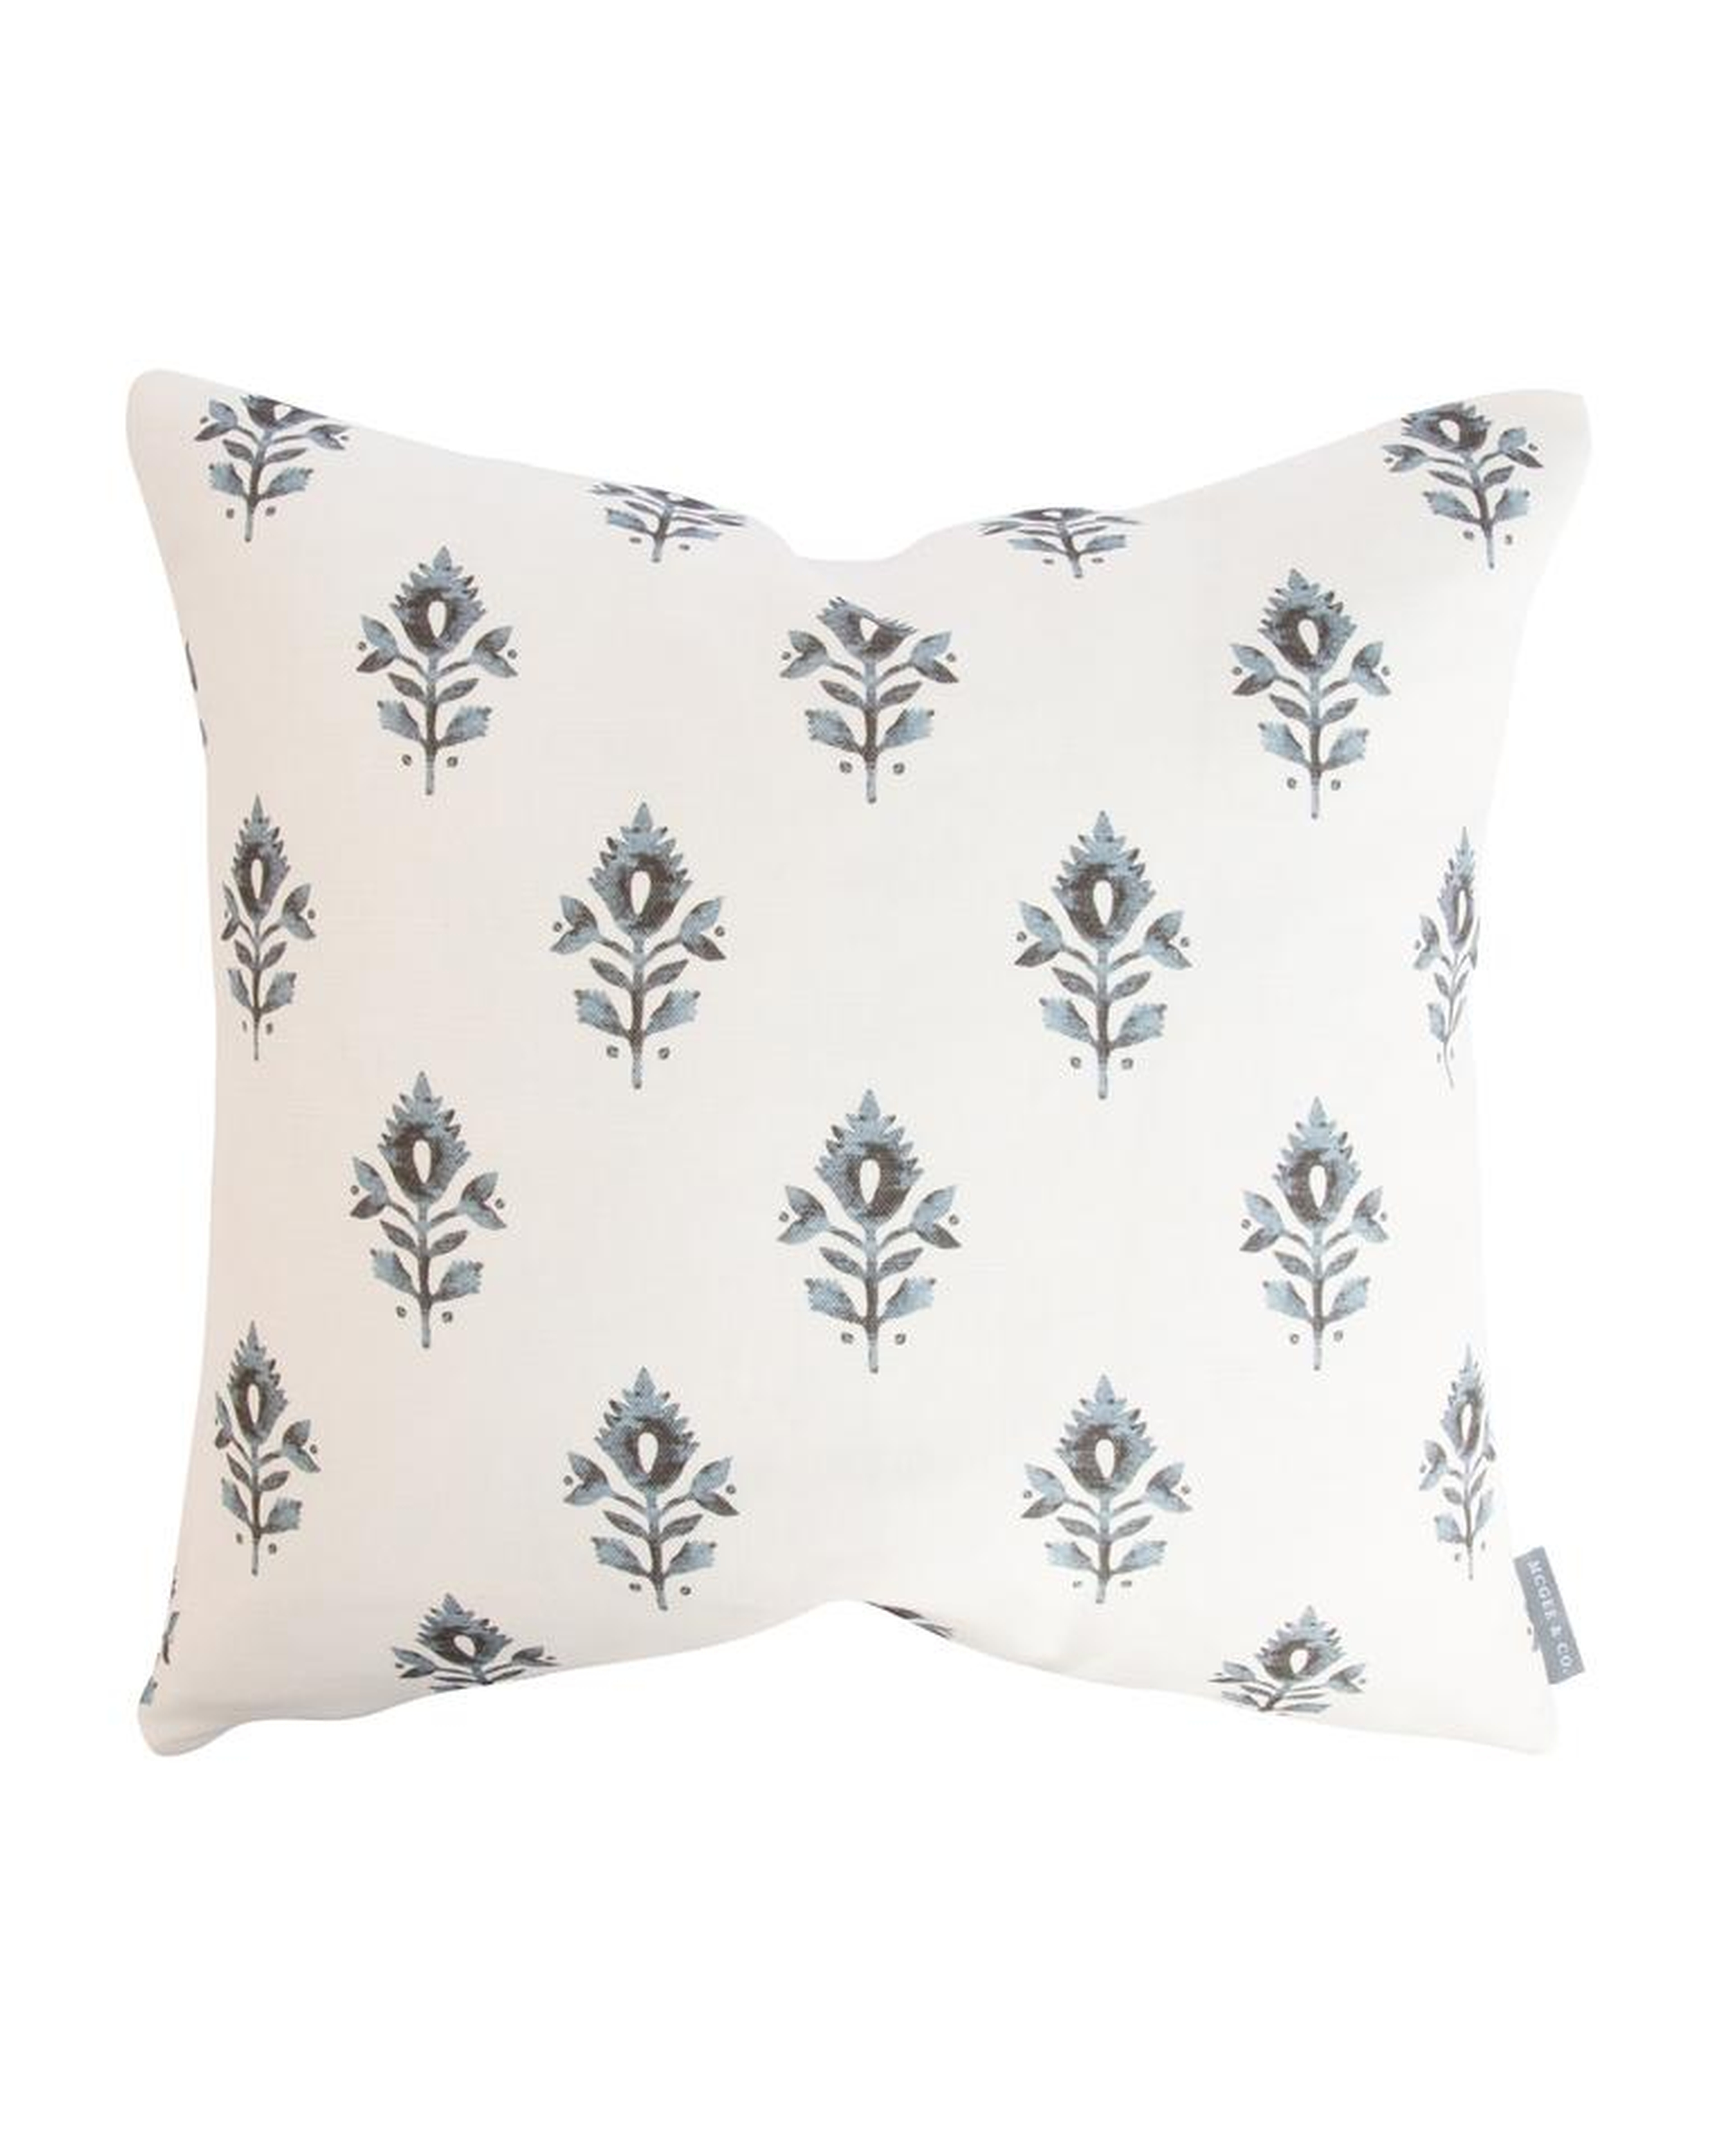 ADDISON BLOCK PRINT PILLOW COVER 22x22 - McGee & Co.